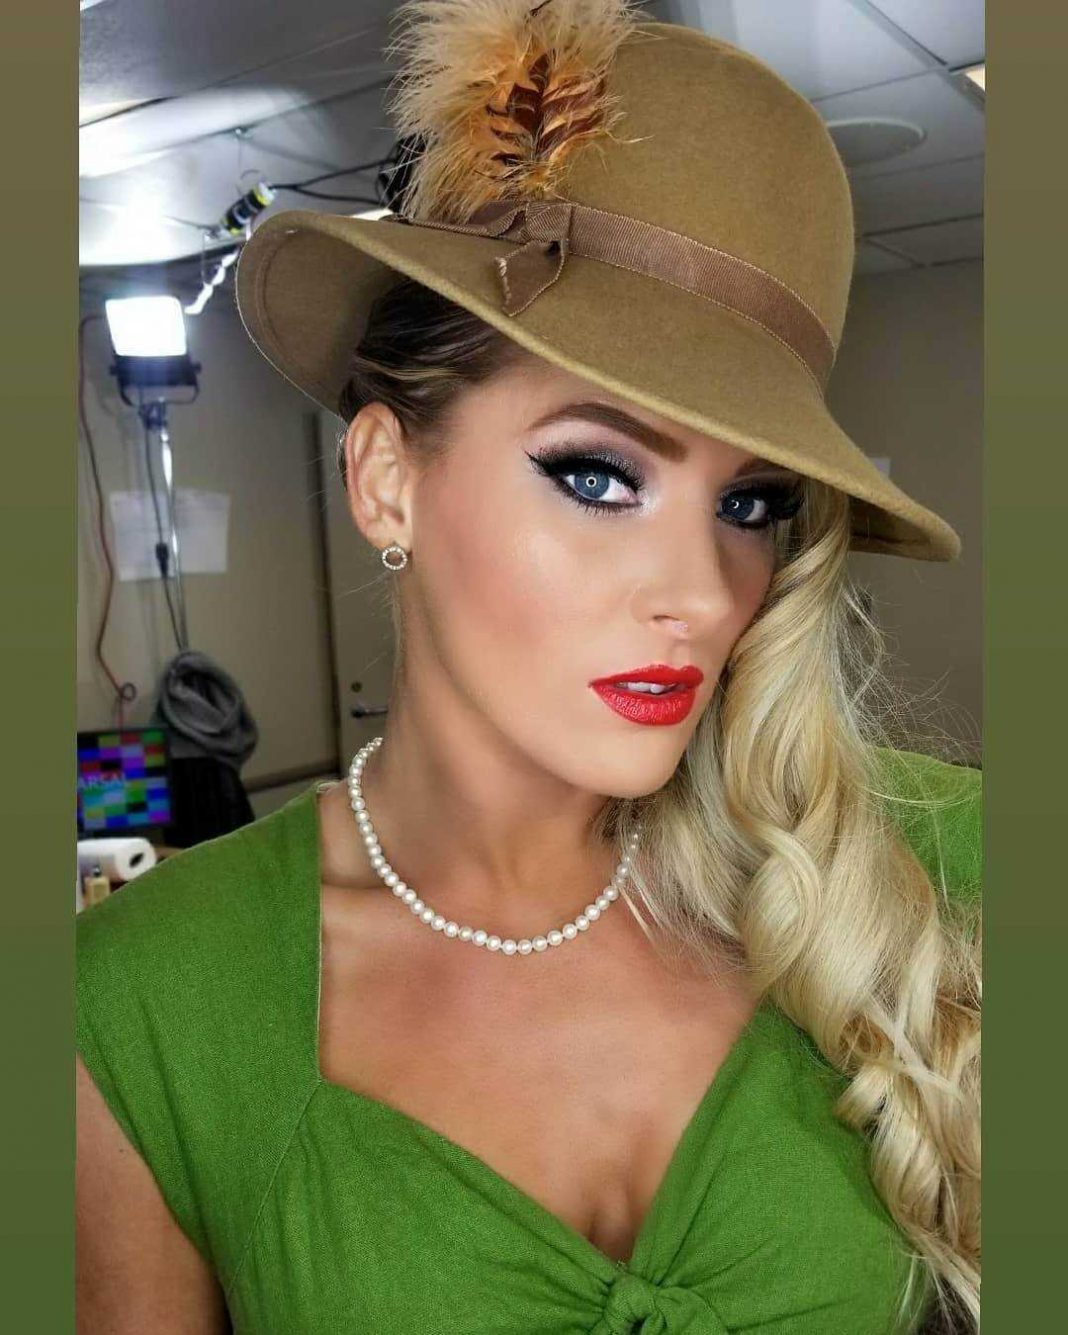 42 Lacey Evans Nude Pictures Present Her Polarizing Appeal 53